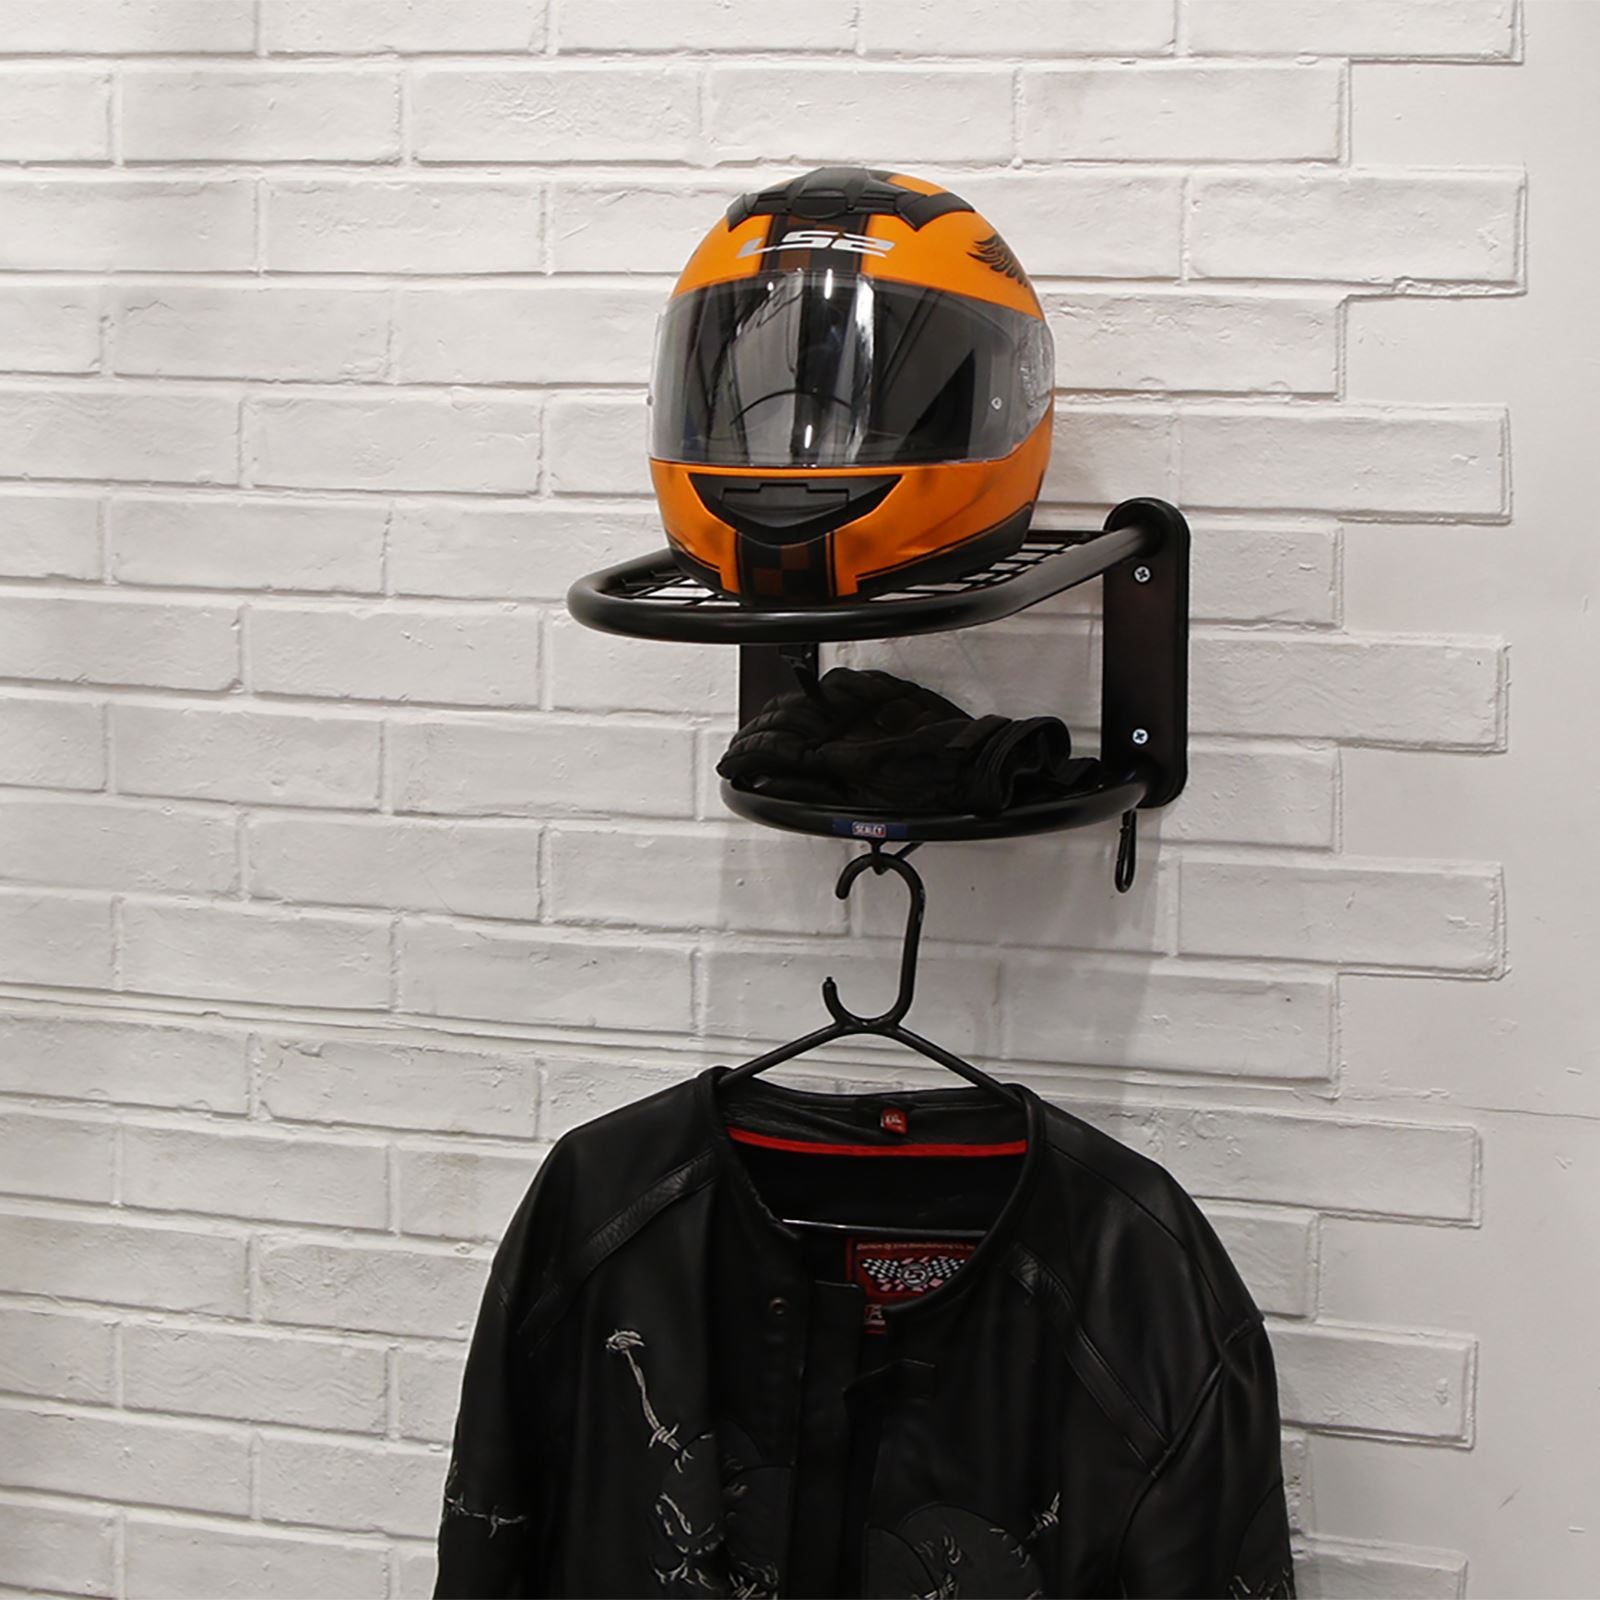 Sealey Motorcycle Helmet, Clothing and Gear Tidy Wall Mounted Shelf Rack 240mm x 405mm